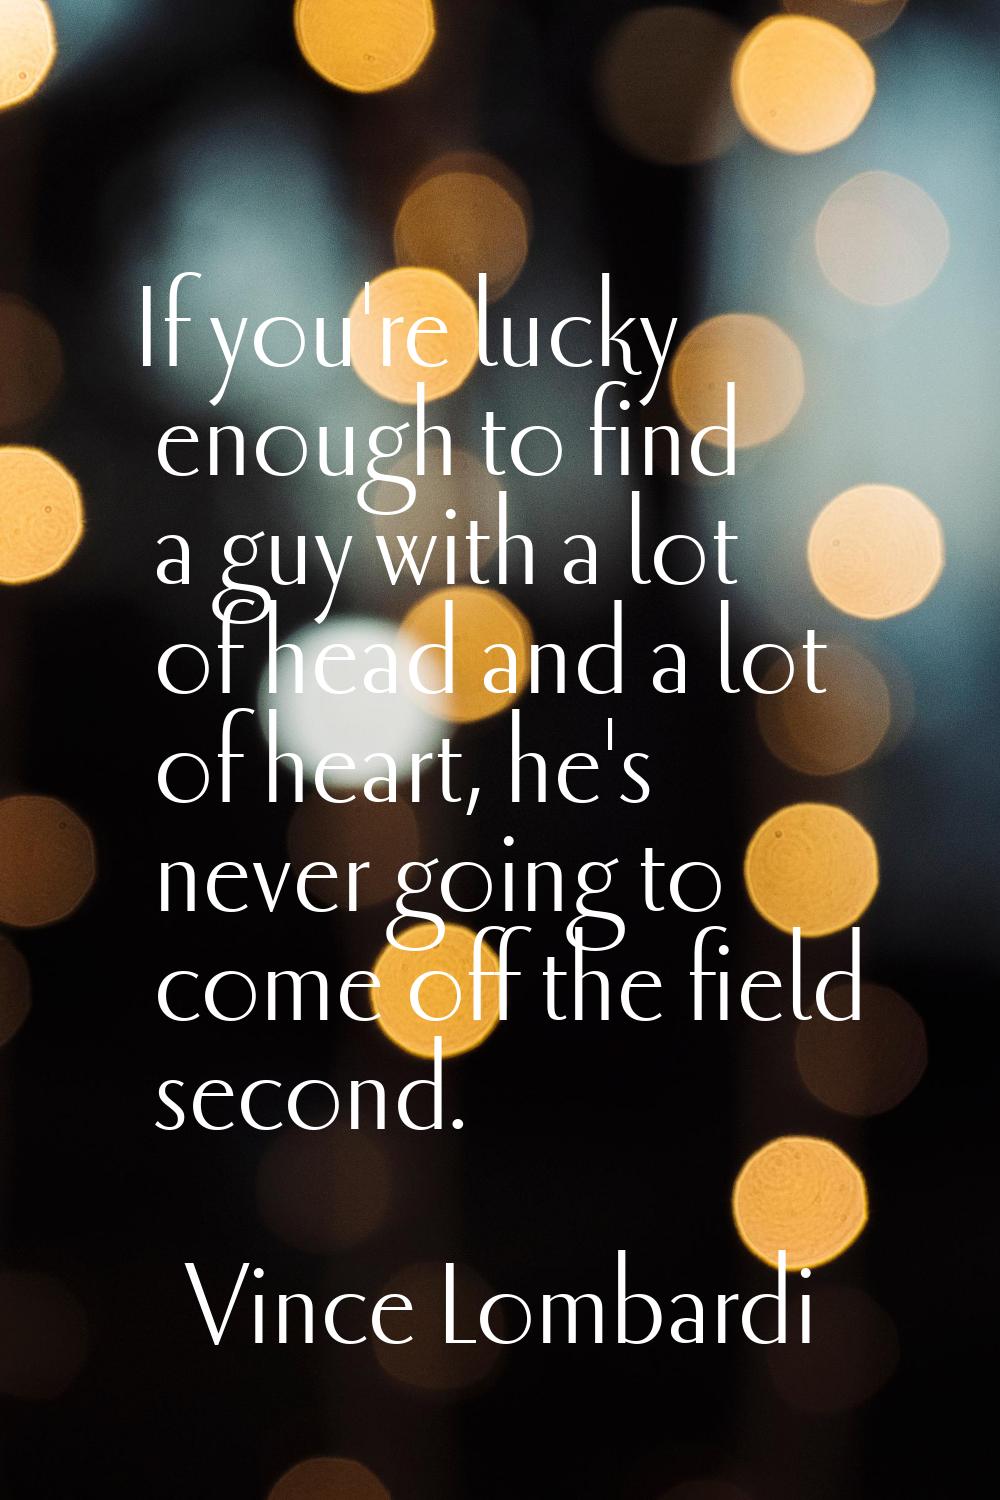 If you're lucky enough to find a guy with a lot of head and a lot of heart, he's never going to com